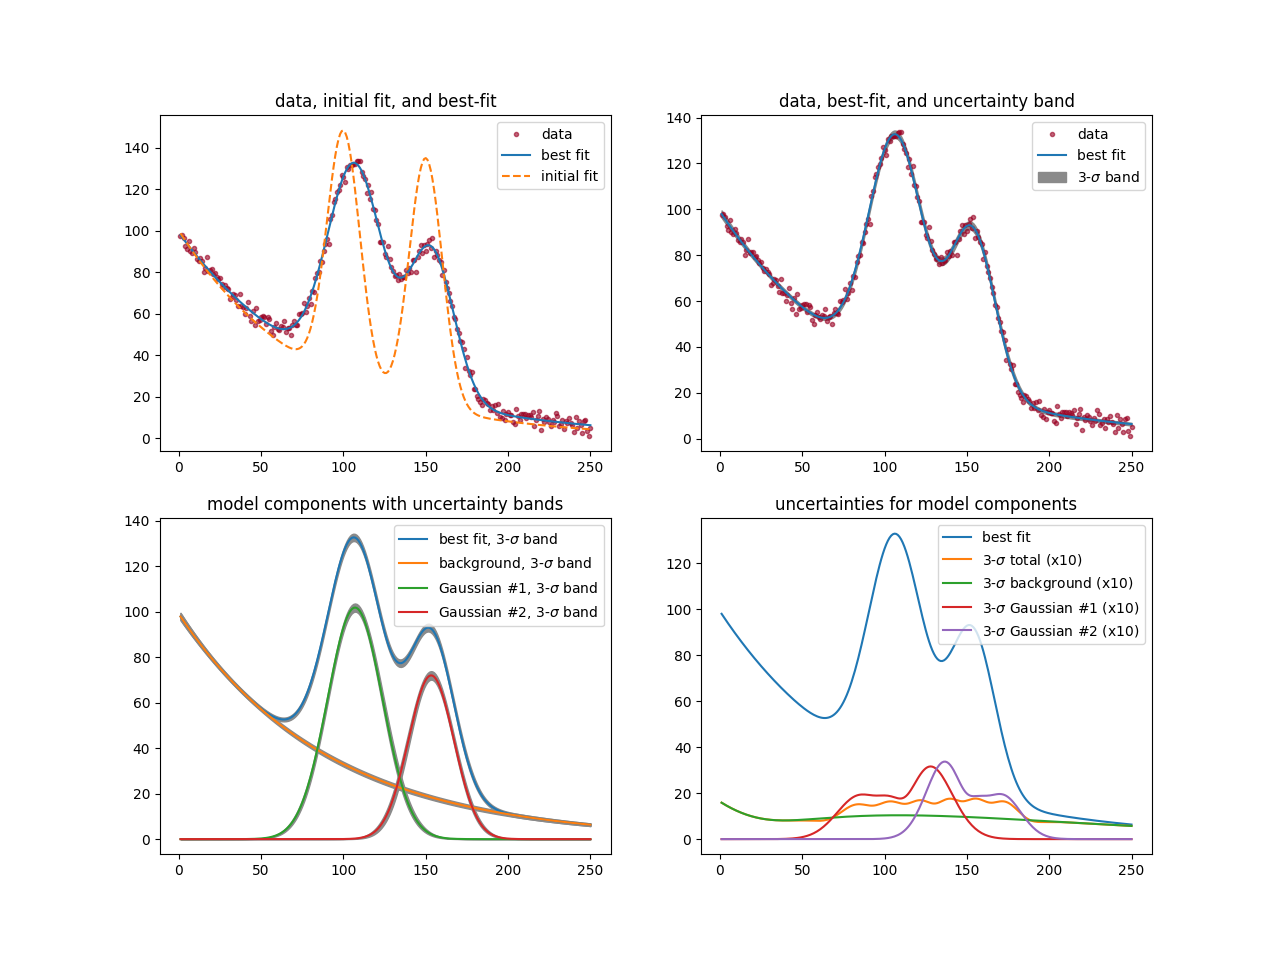 data, initial fit, and best-fit, data, best-fit, and uncertainty band, model components with uncertainty bands, uncertainties for model components